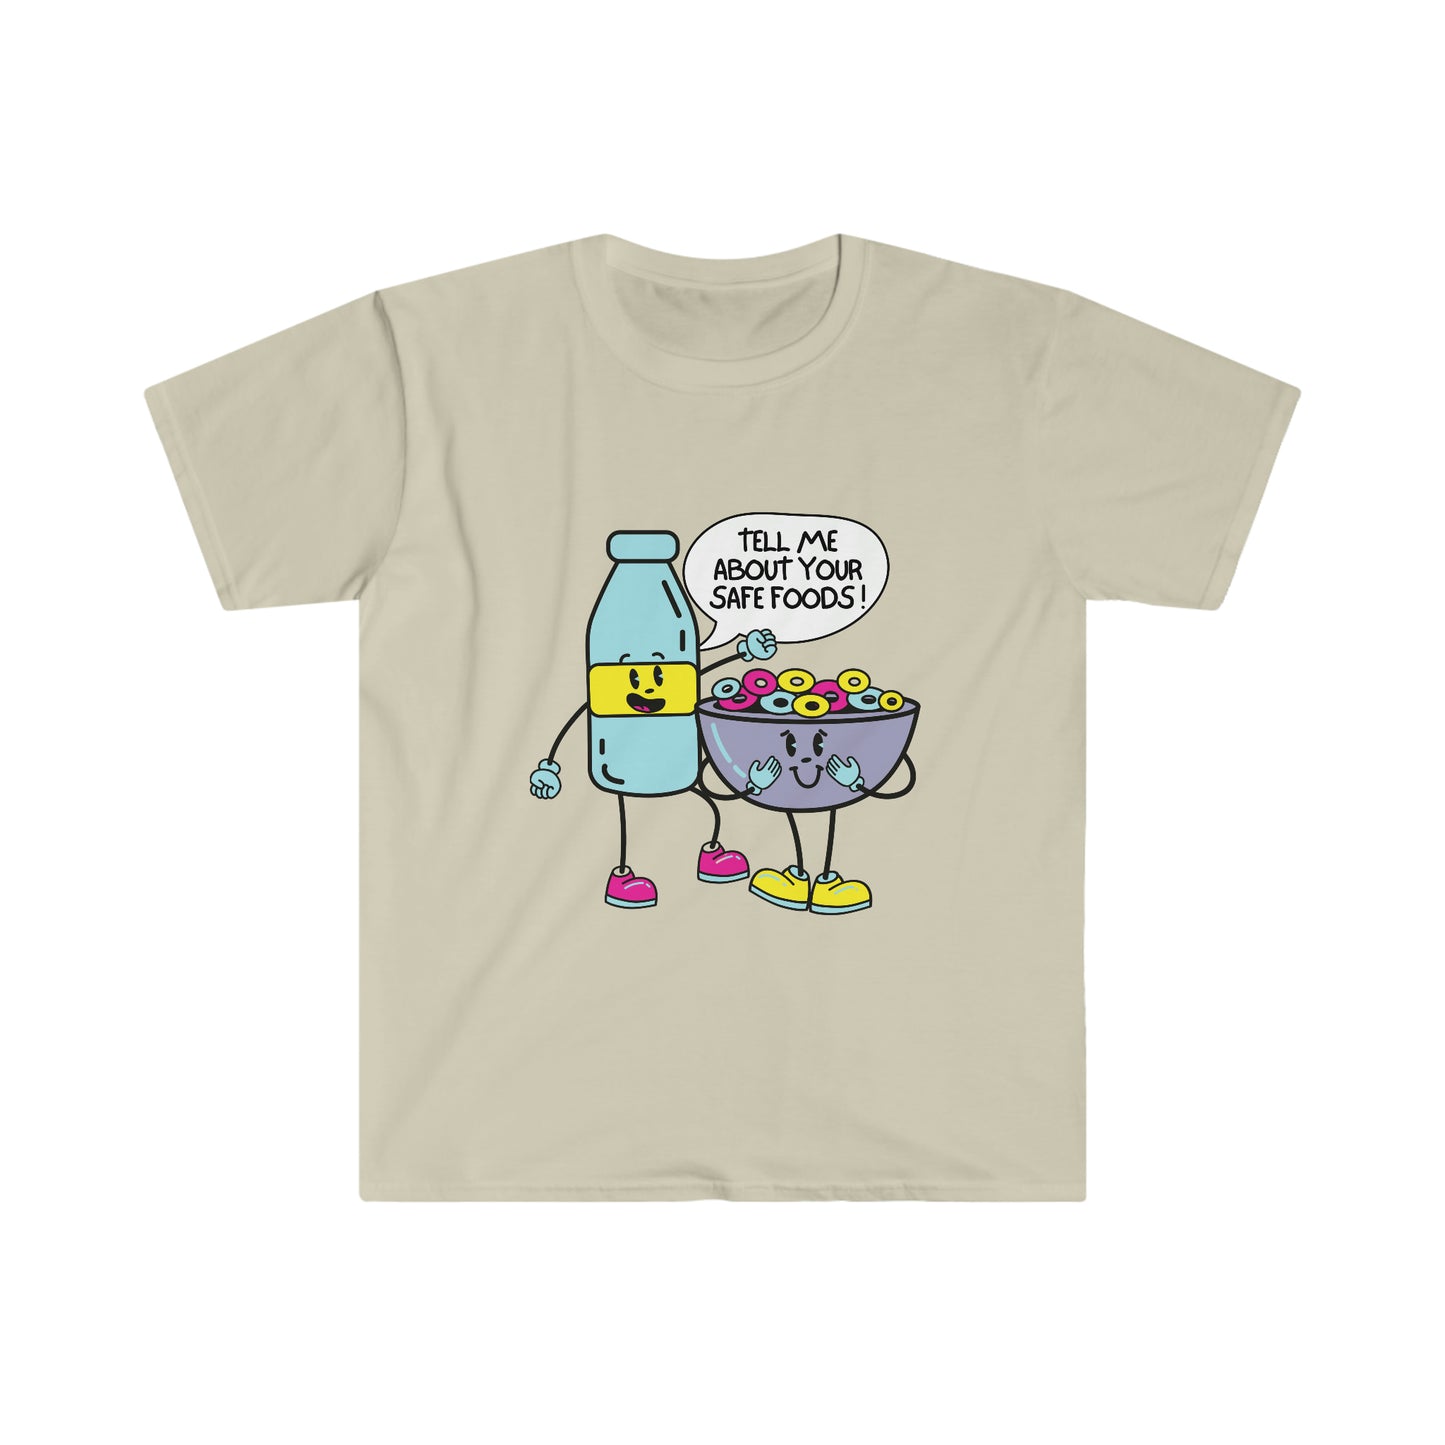 "Tell Me About Your Safe Foods!" Unisex Softstyle T-Shirt